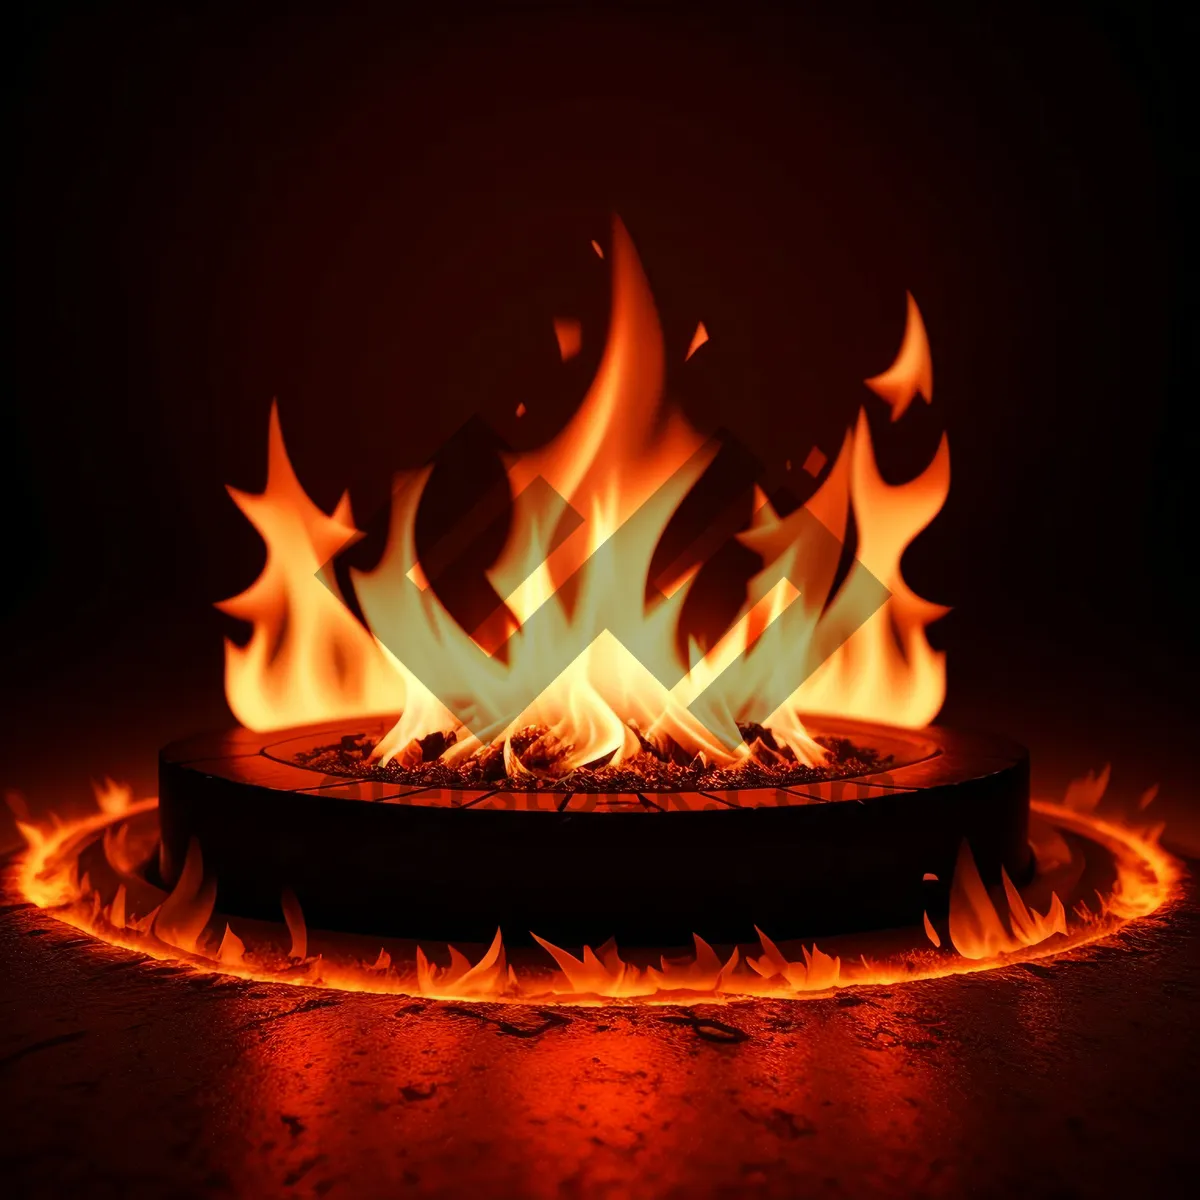 Picture of Blazing Warmth: Fiery Art of Flames